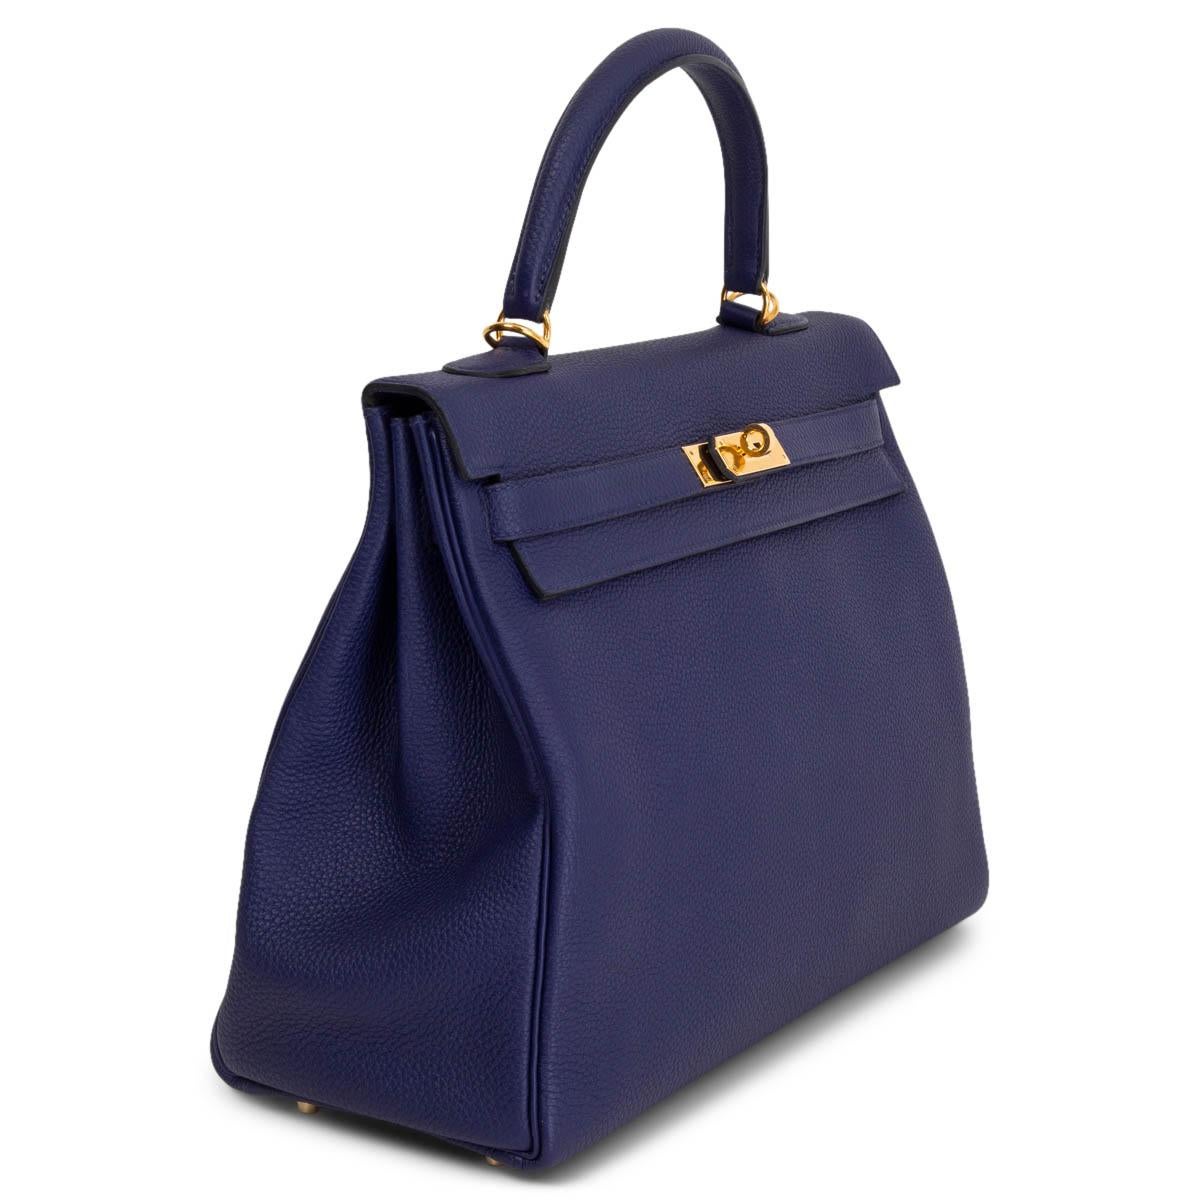 100% authentic Hermès Kelly 35 soulder bag in Bleu Encre Togo leather with gold-tone hardware. Lined in Bleu Saphir goat skin leather with two open pockets against the front and a zipper pocket against the back. Has been carried with minimal visible